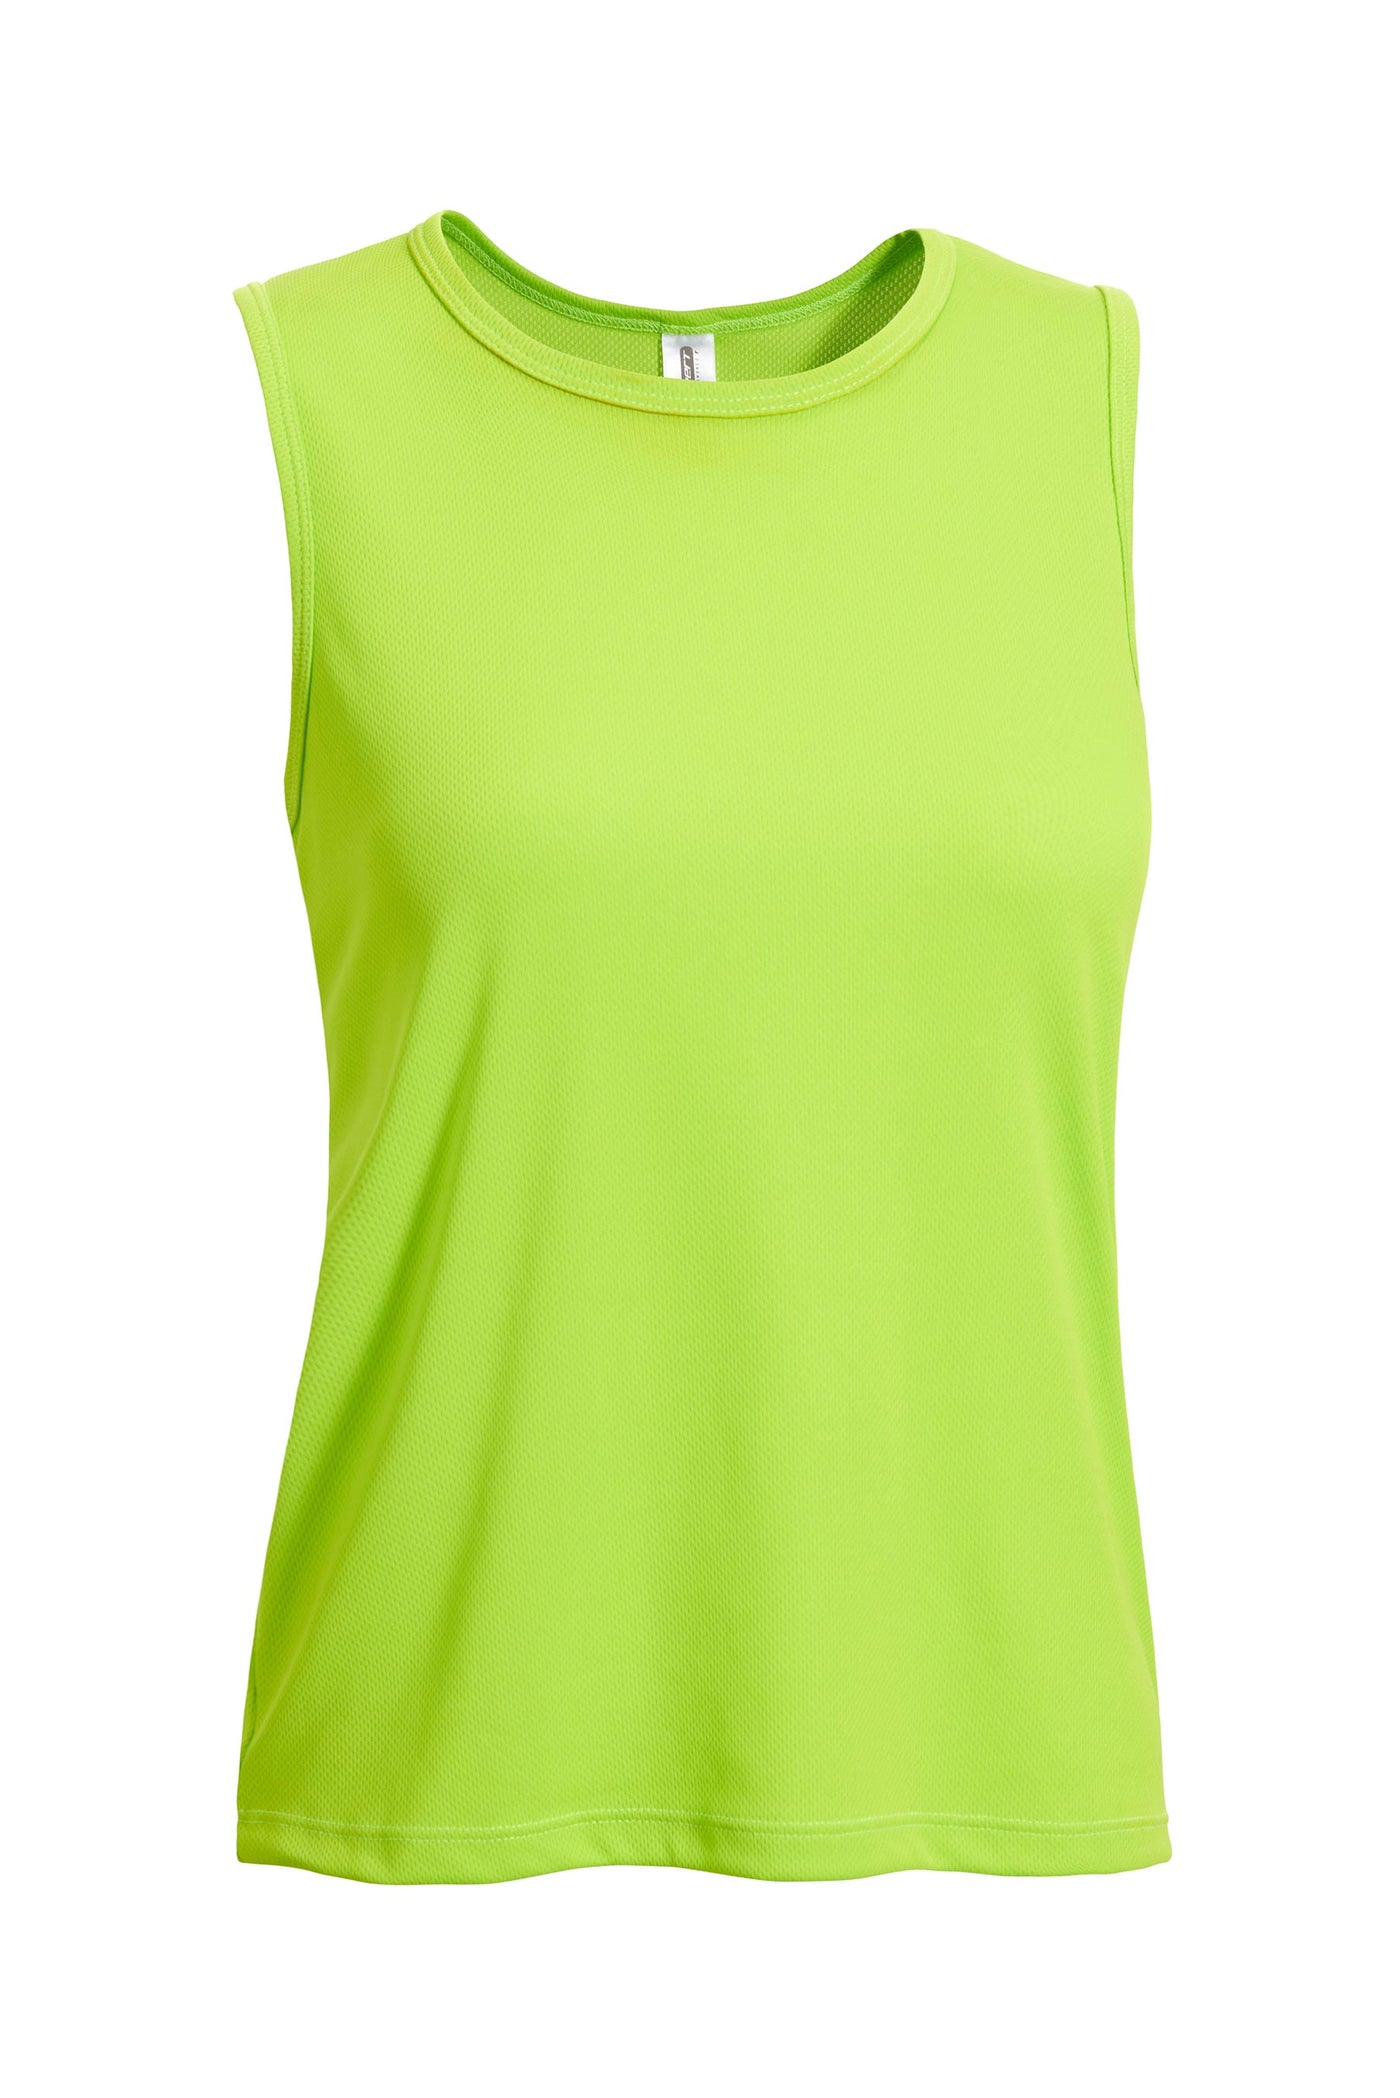 Expert Brand Retail Women's Oxymesh™ Sleeveless Tank Royal Blue Made in USA key lime#color_key-lime